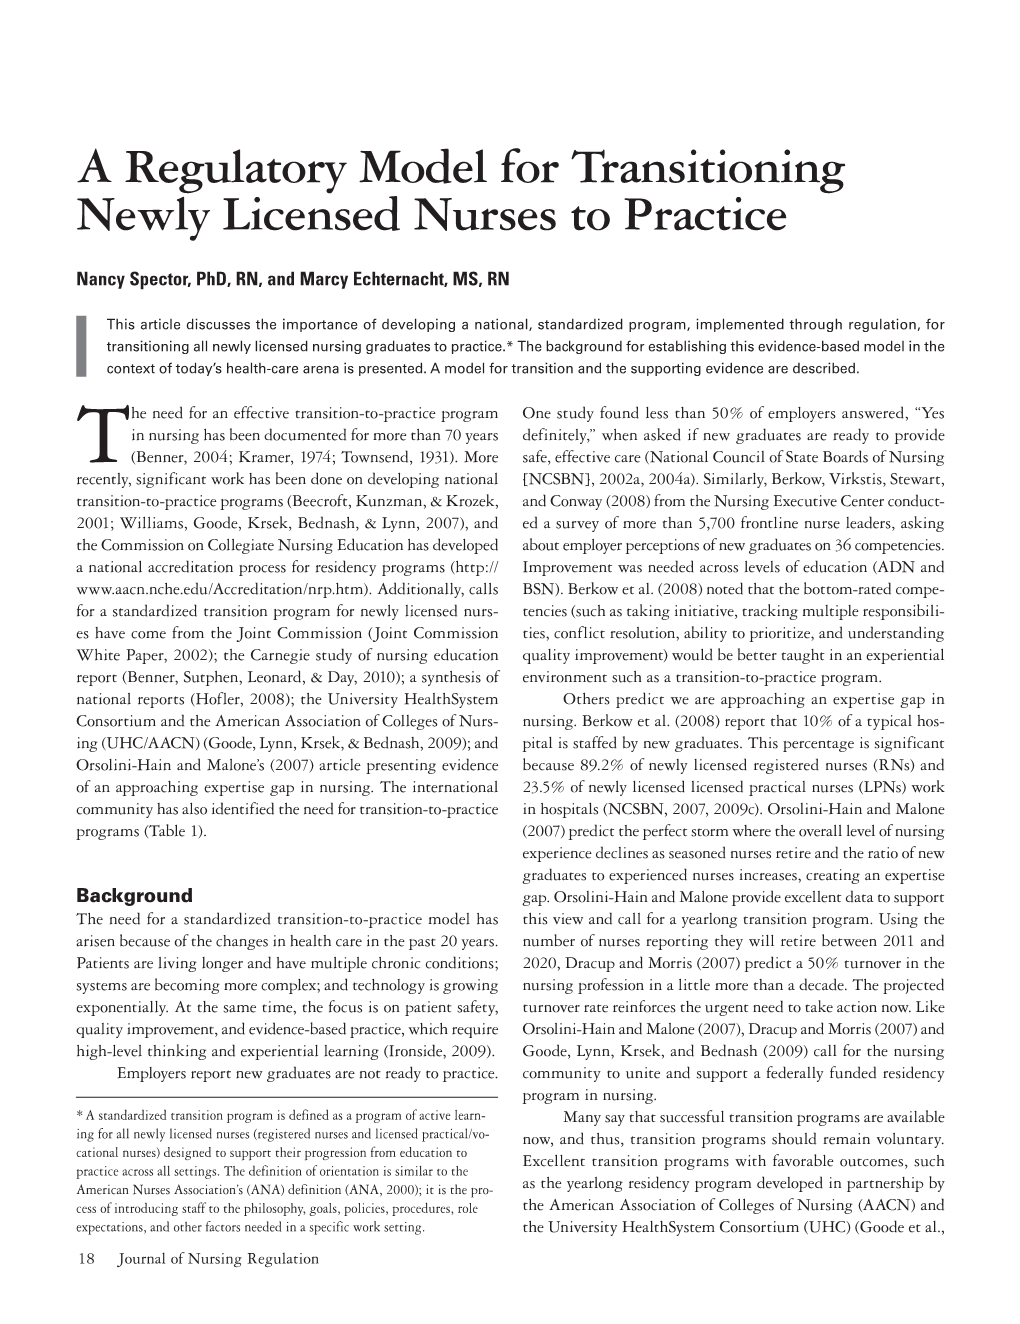 A Regulatory Model for Transitioning Newly Licensed Nurses to Practice